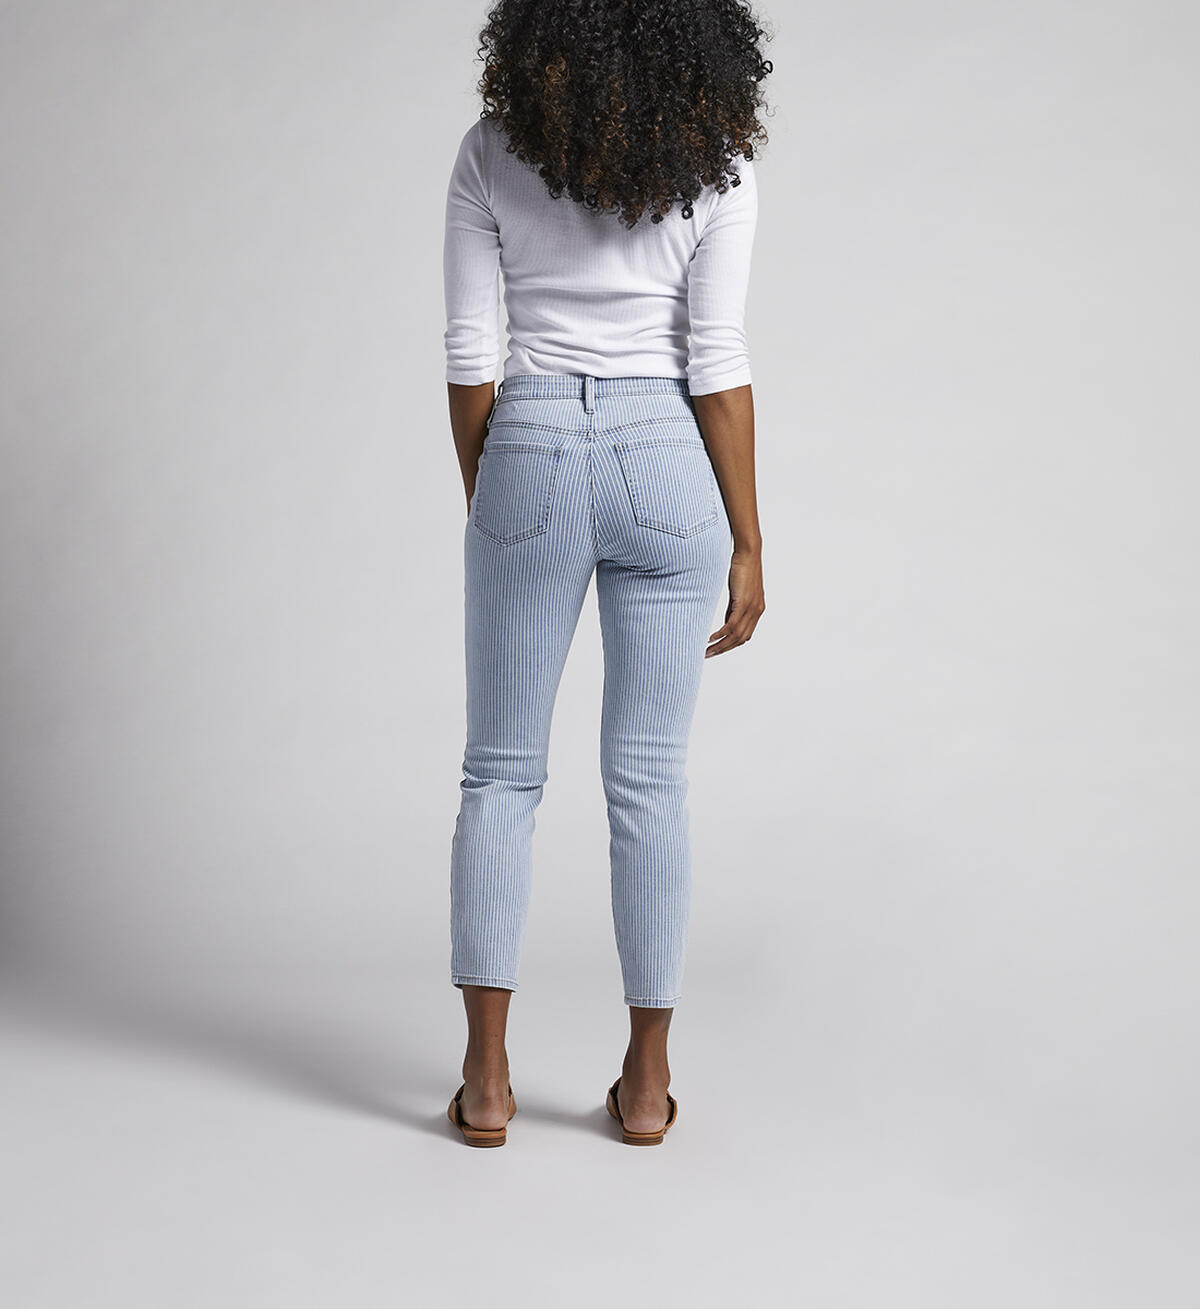 Cecilia Mid Rise Ankle Skinny Jeans, , hi-res image number 1